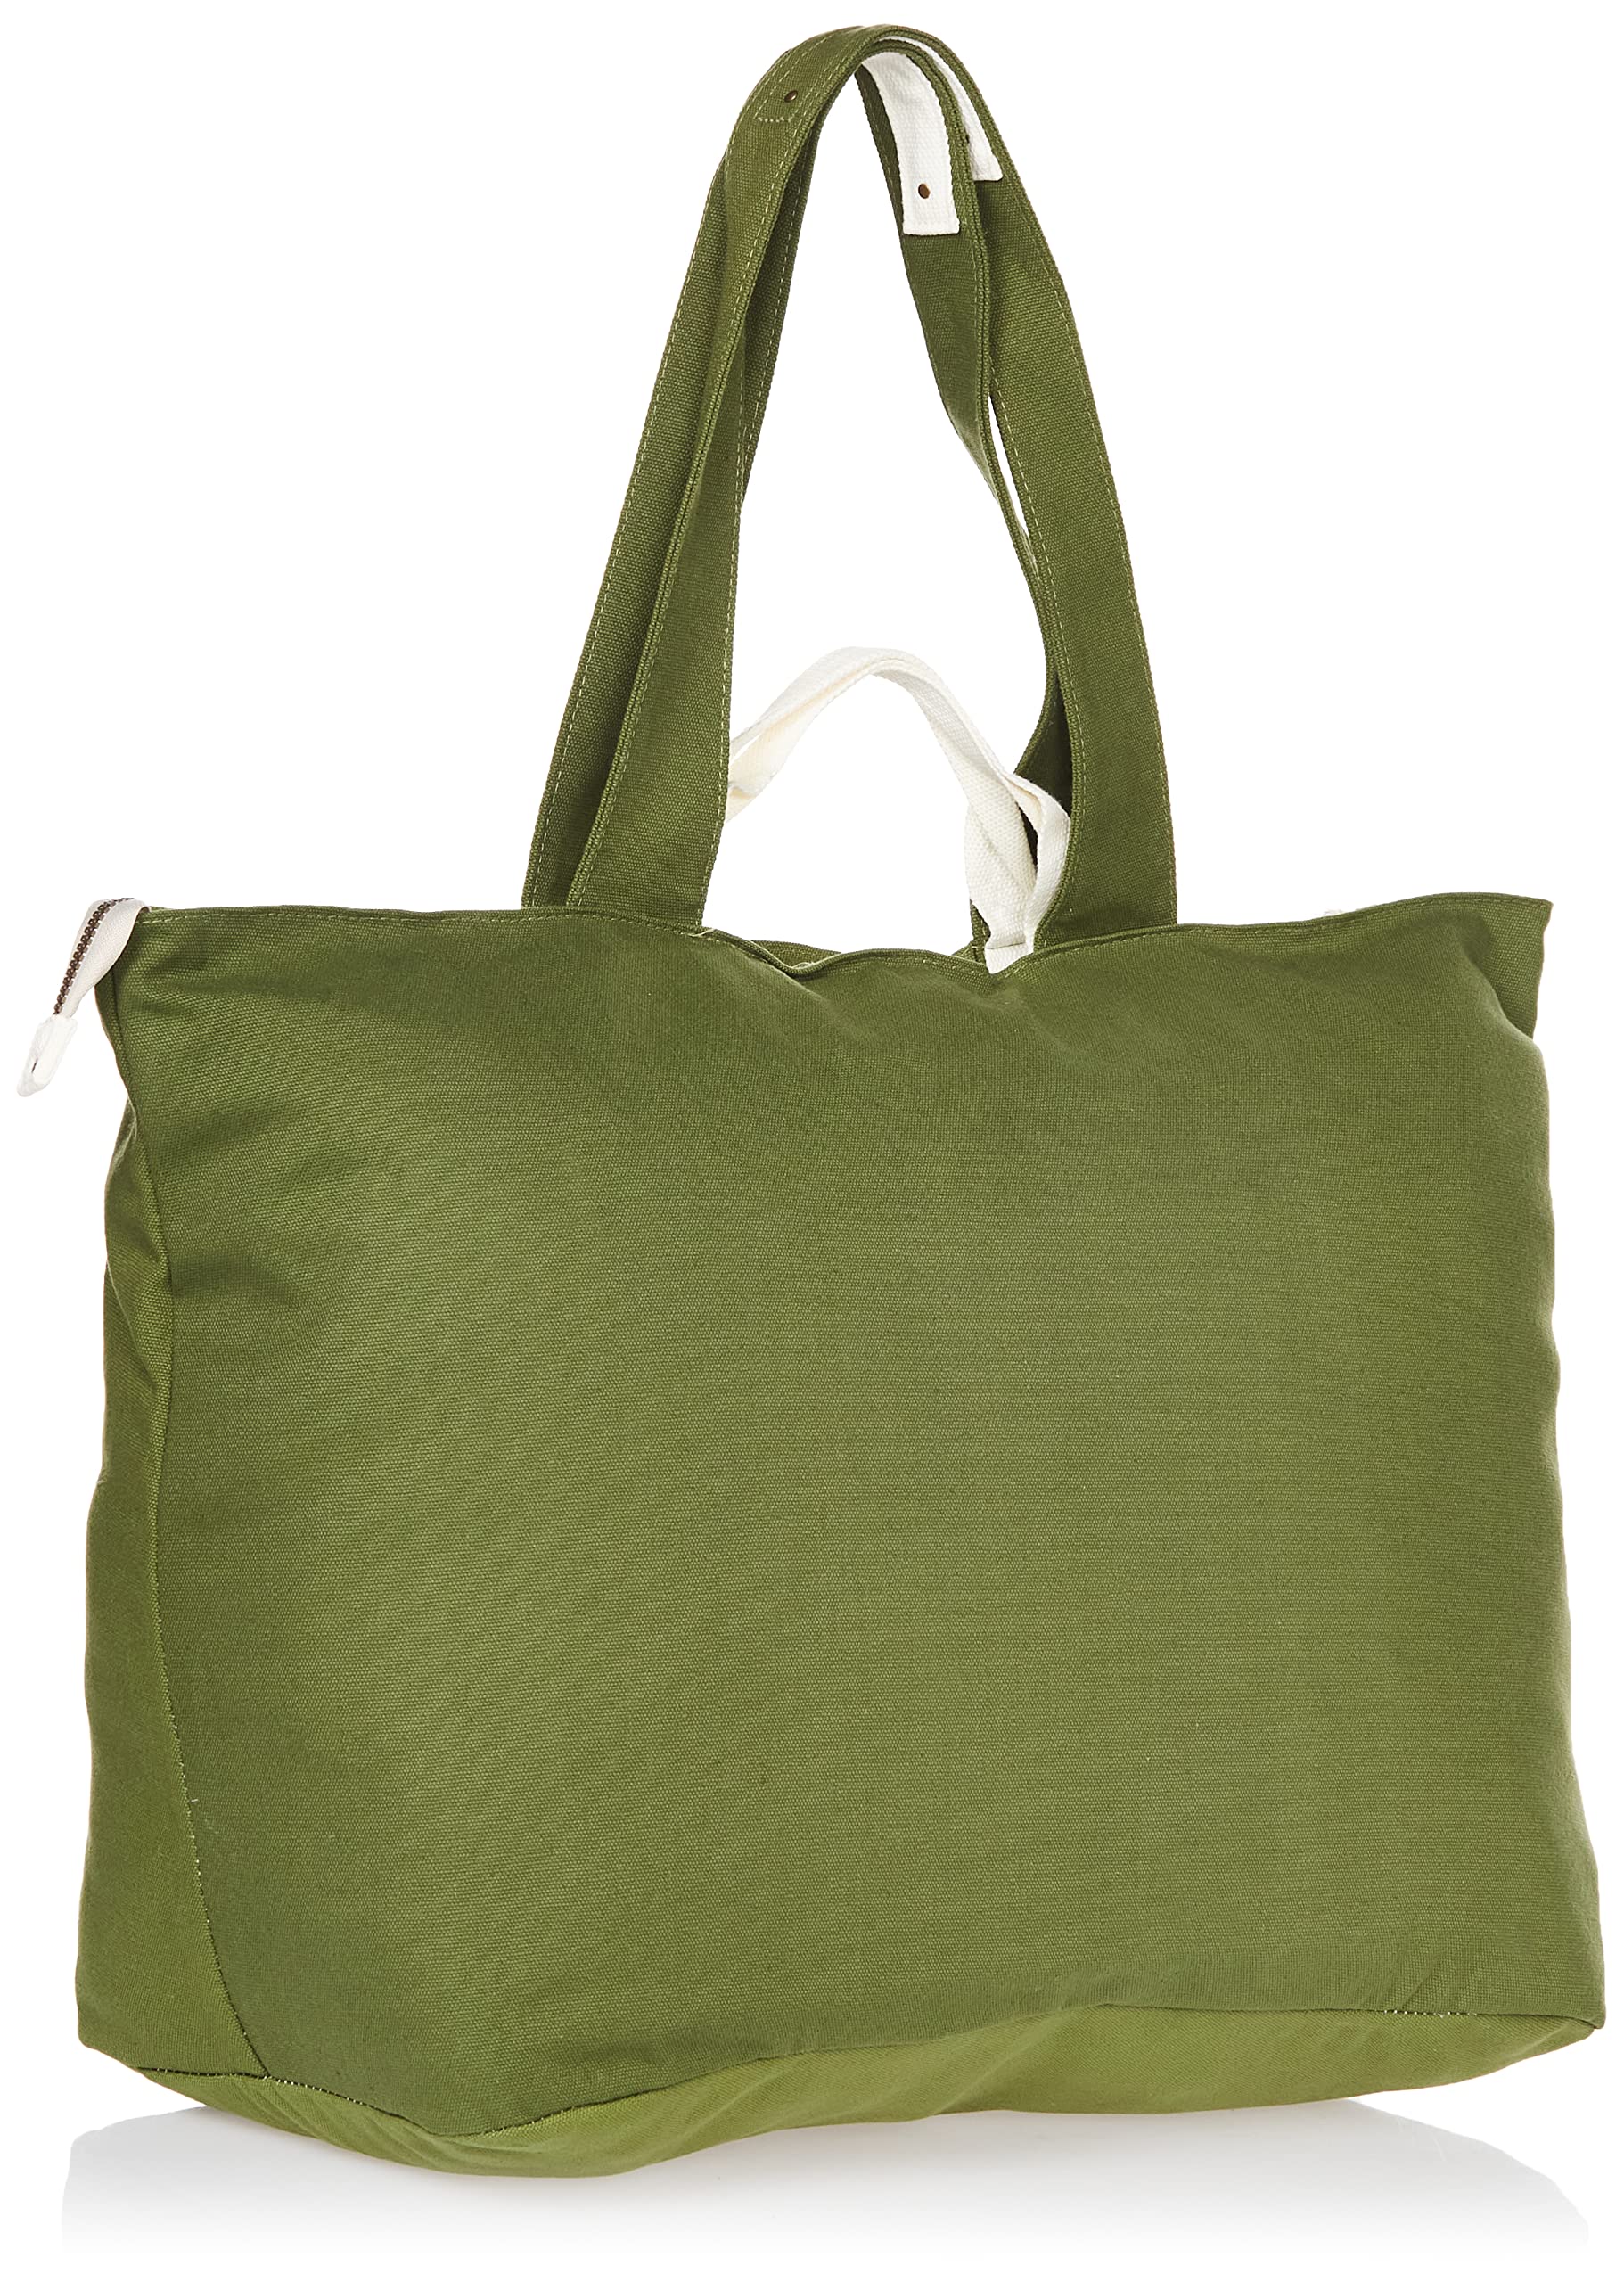 Foundry by Fit + Fresh, All The Things Tote Bag, Luggage, Travel Duffle Bag and Beach Bag, Multiple Colors